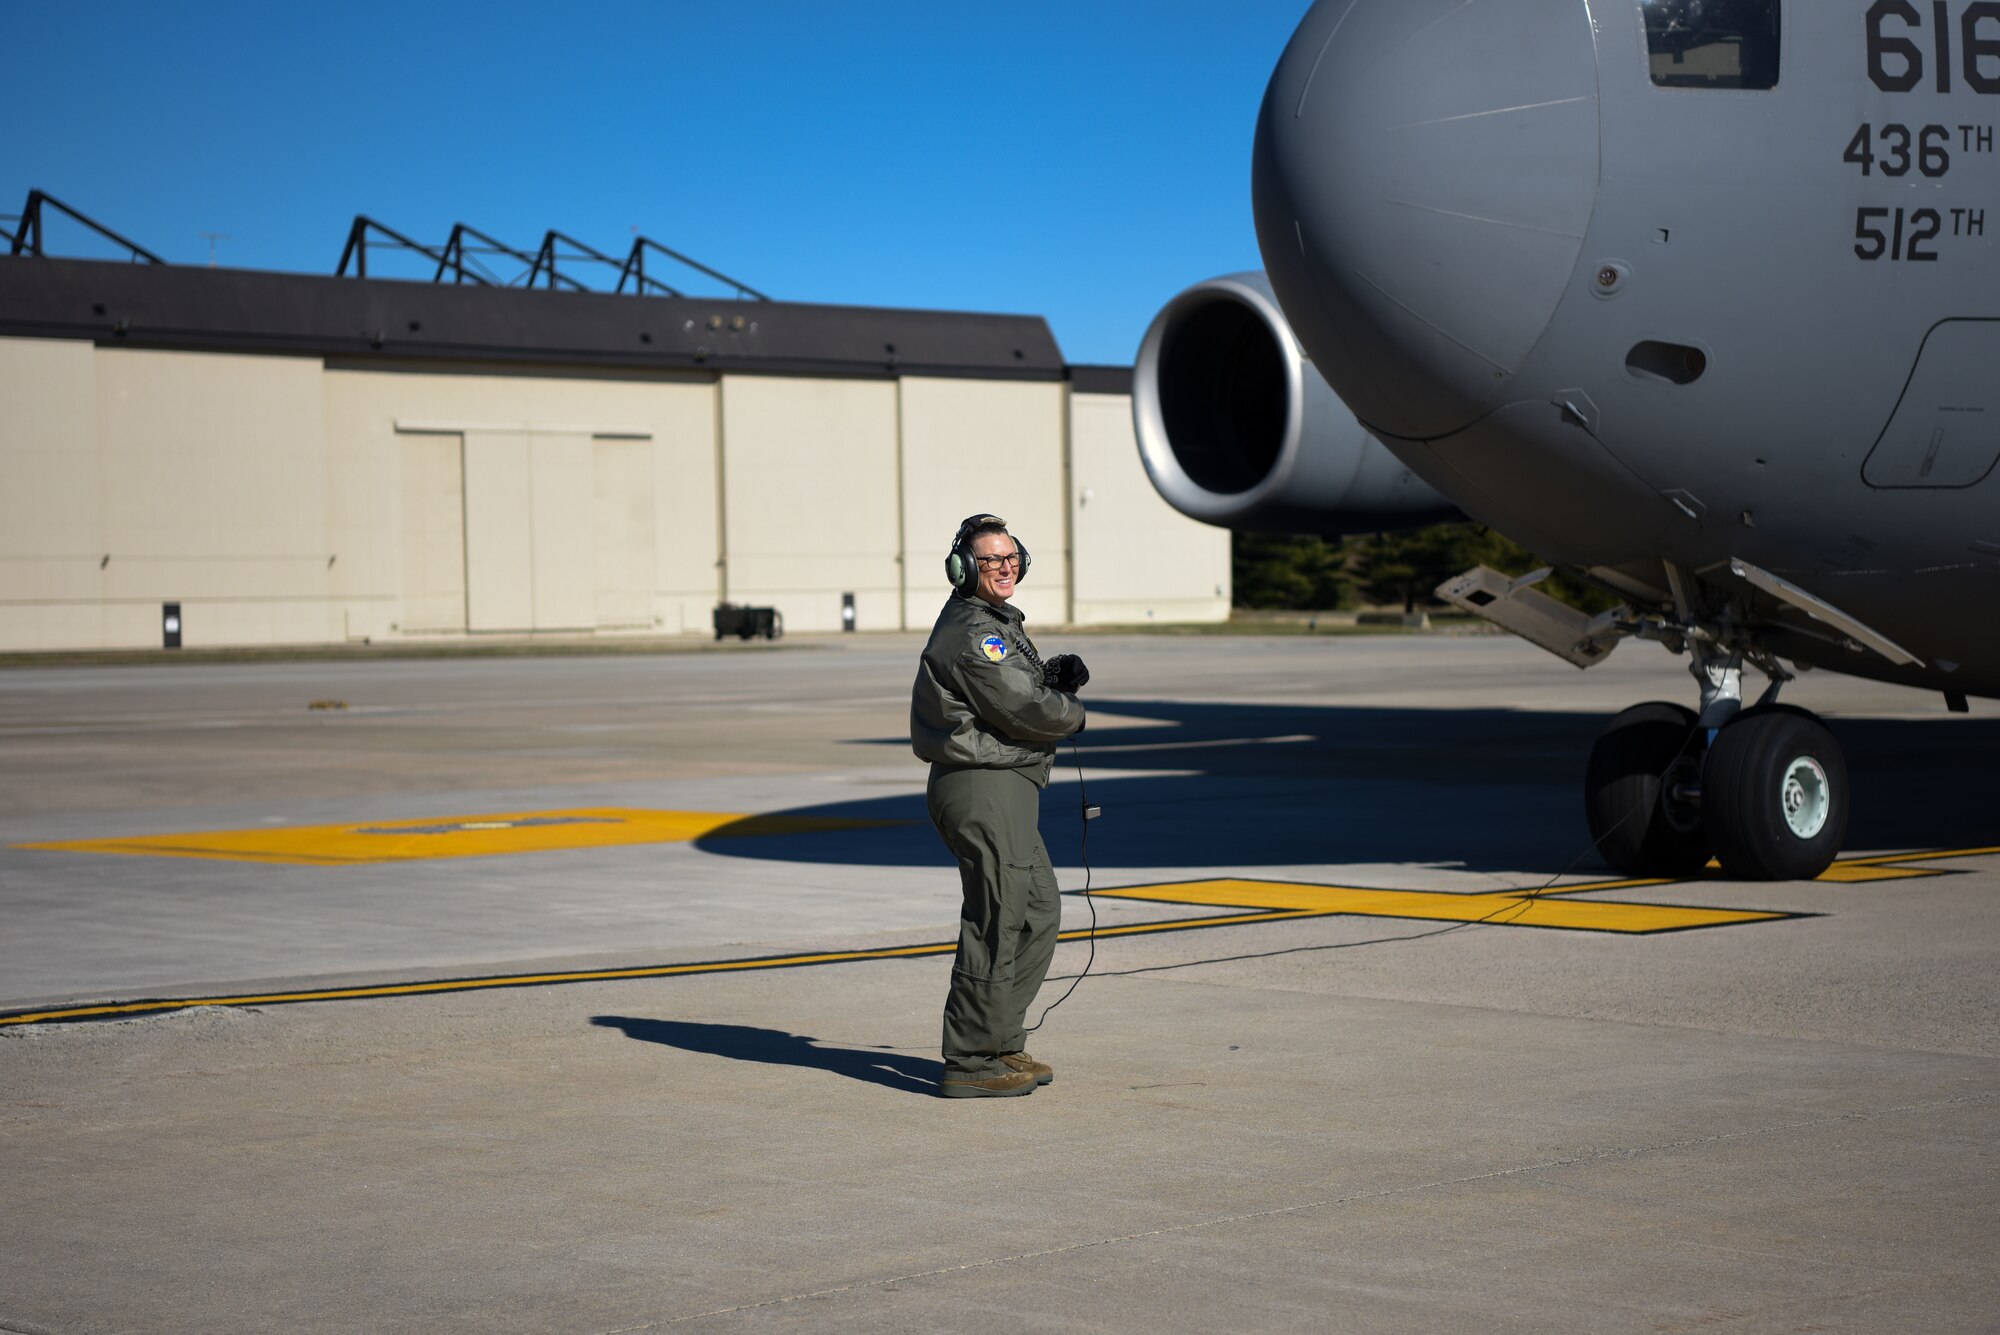 Senior Master Sgt. Lori Tascione, 3rd Airlift Squadron superintendent, scans for engine start March 5, 2018, at Dover Air Force Base, Del. Tascione joined an all-female crew to fly the final flight of her career. (U.S. Air Force Photo by Airman 1st Class Zoe M. Wockenfuss)